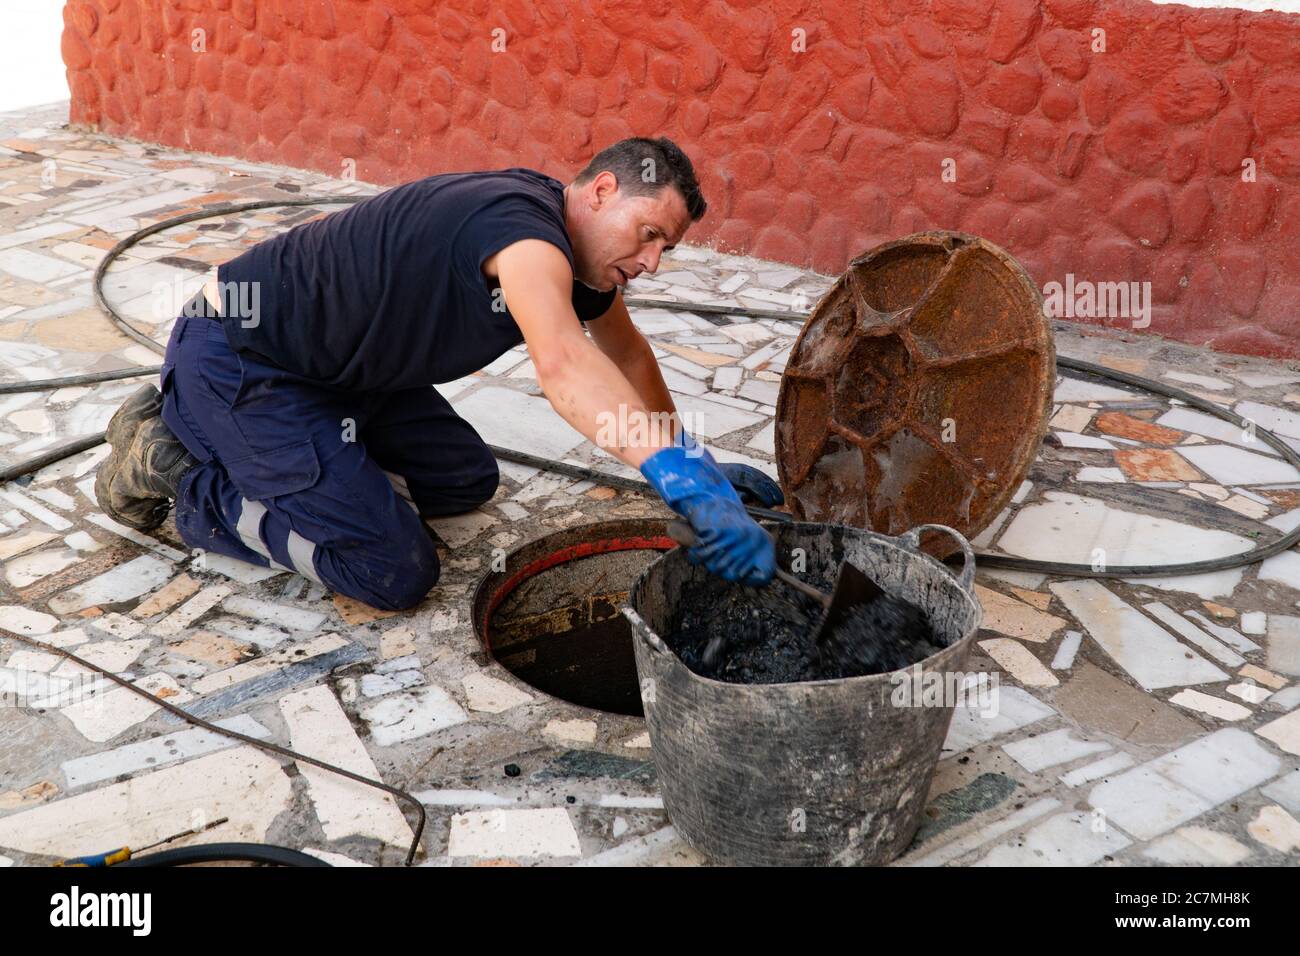 July 13, 2020. Granada. Spain: Worker cleans the drains hatch and removes dirt and debris from the sewer. Plumber cleans the sewer Stock Photo